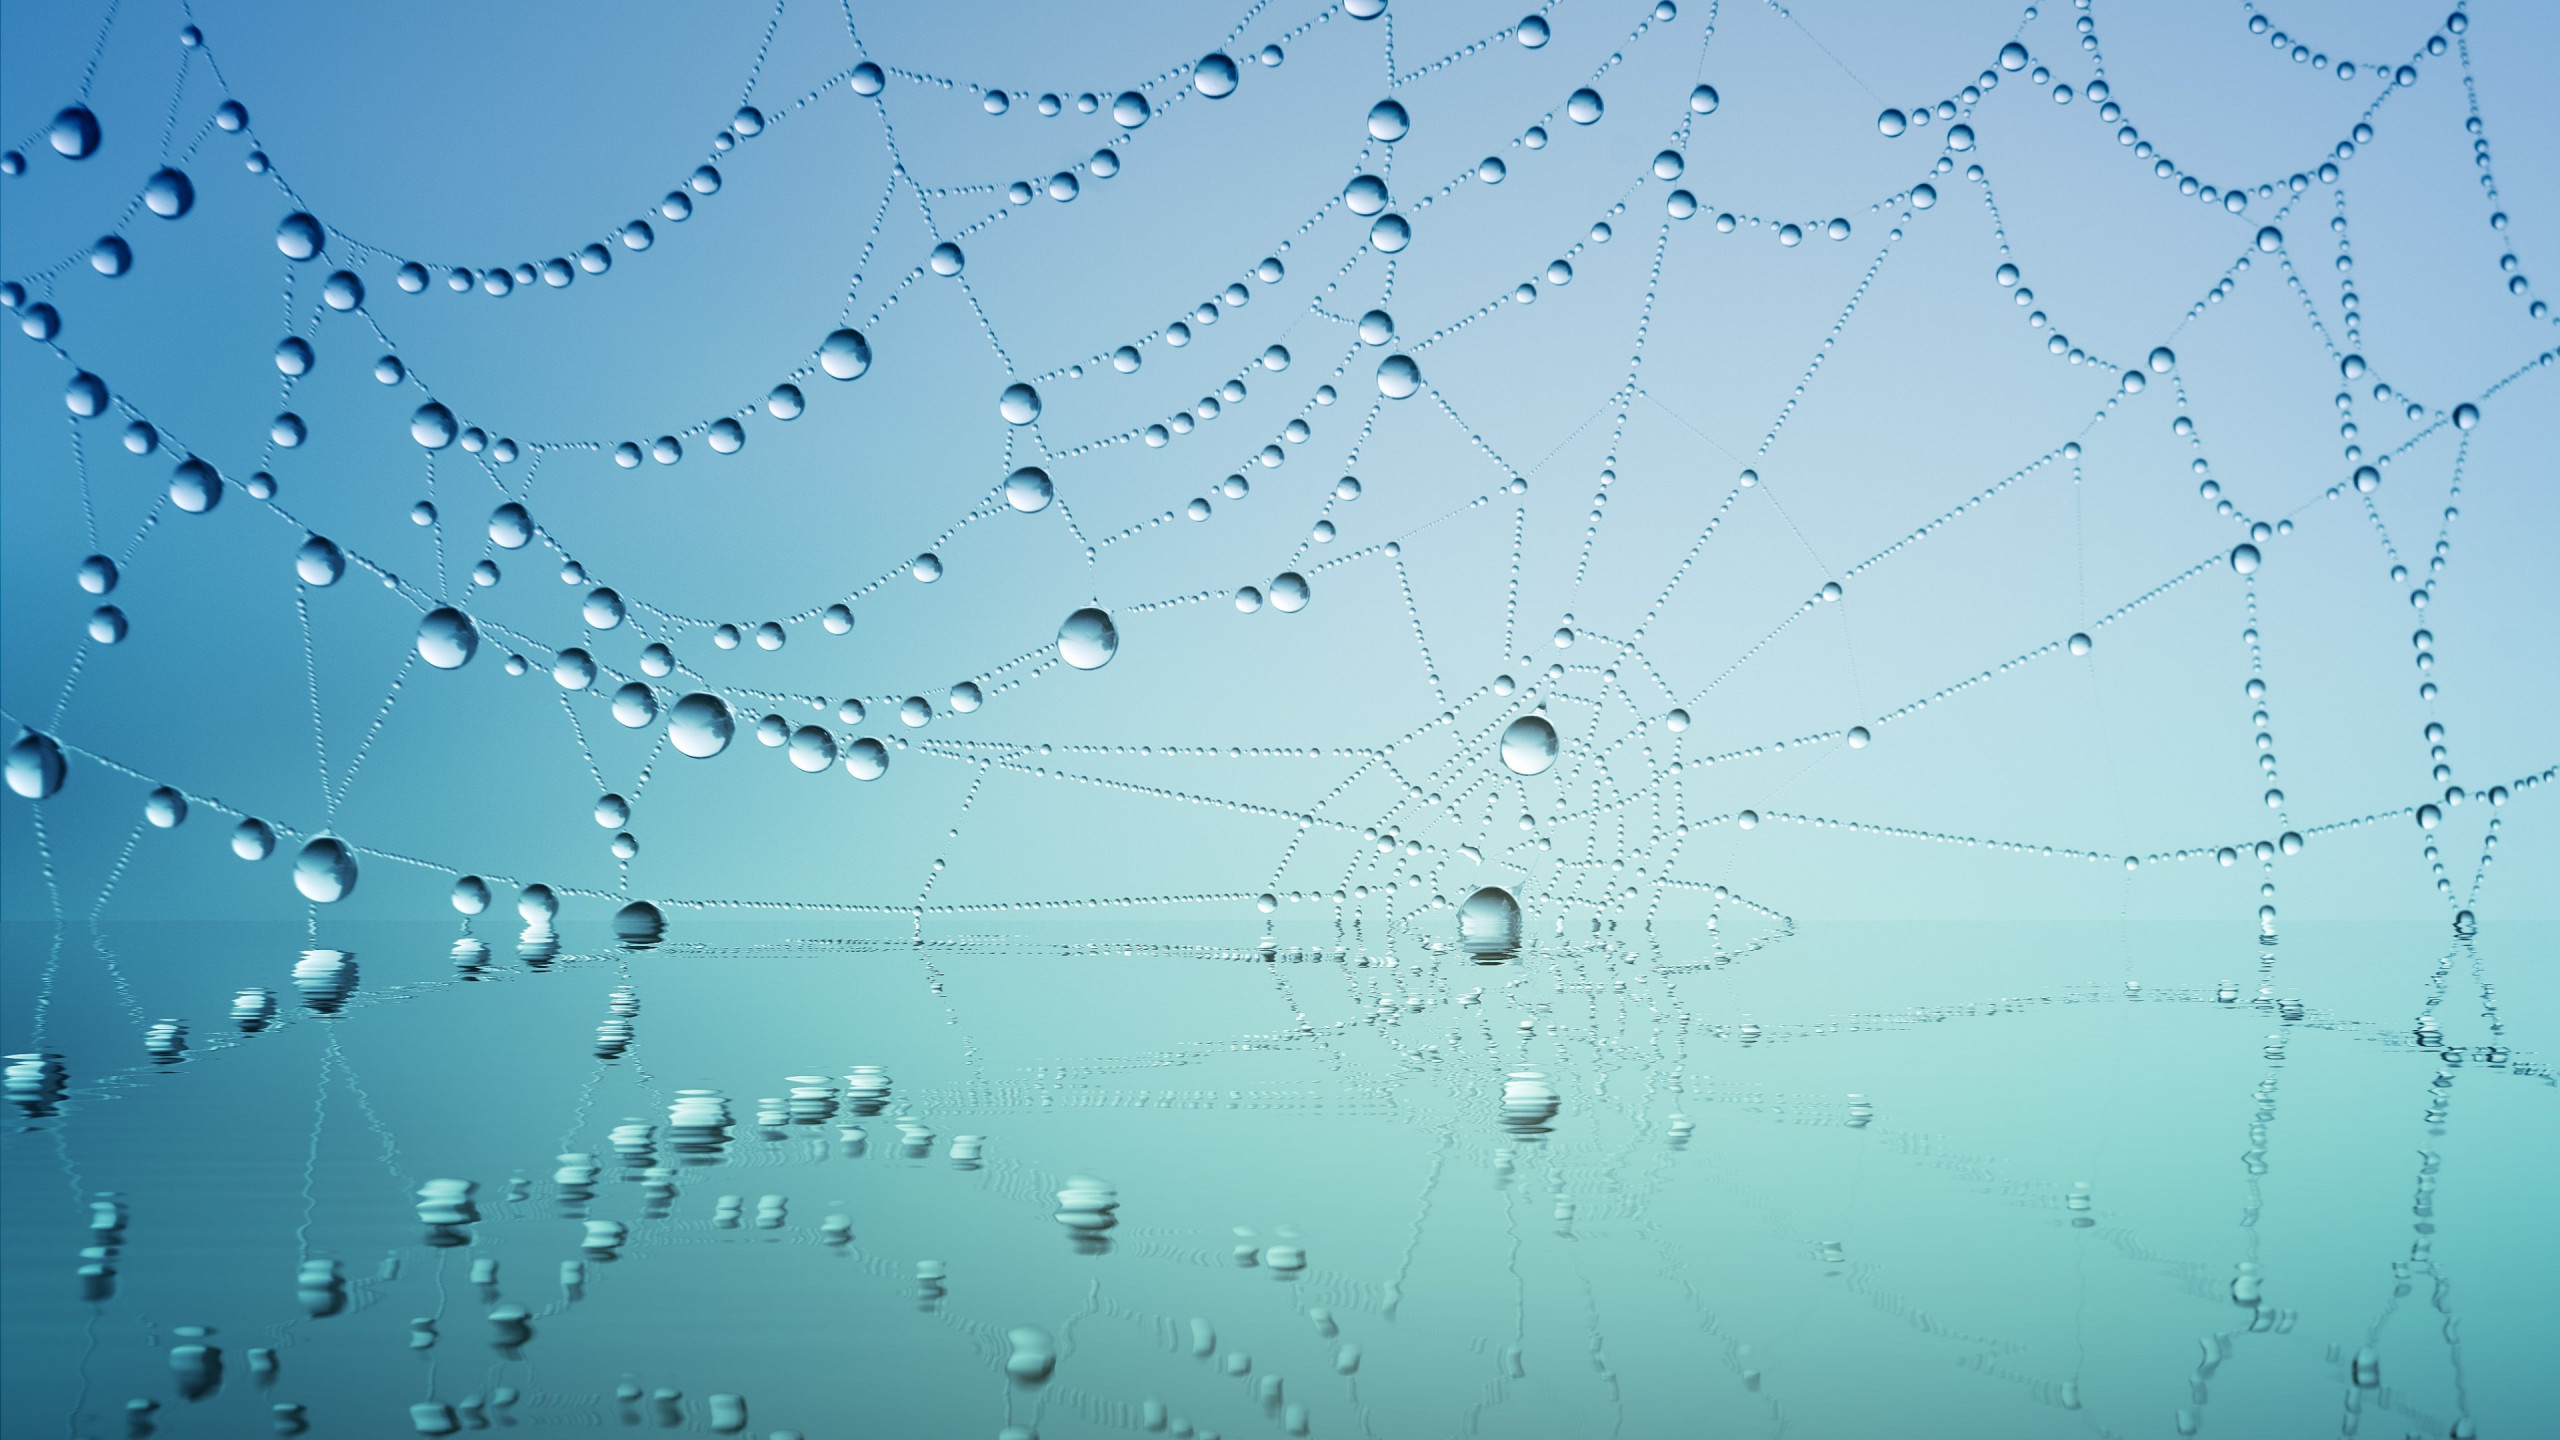 Dew drops on the spider web wallpaper 2560x1440